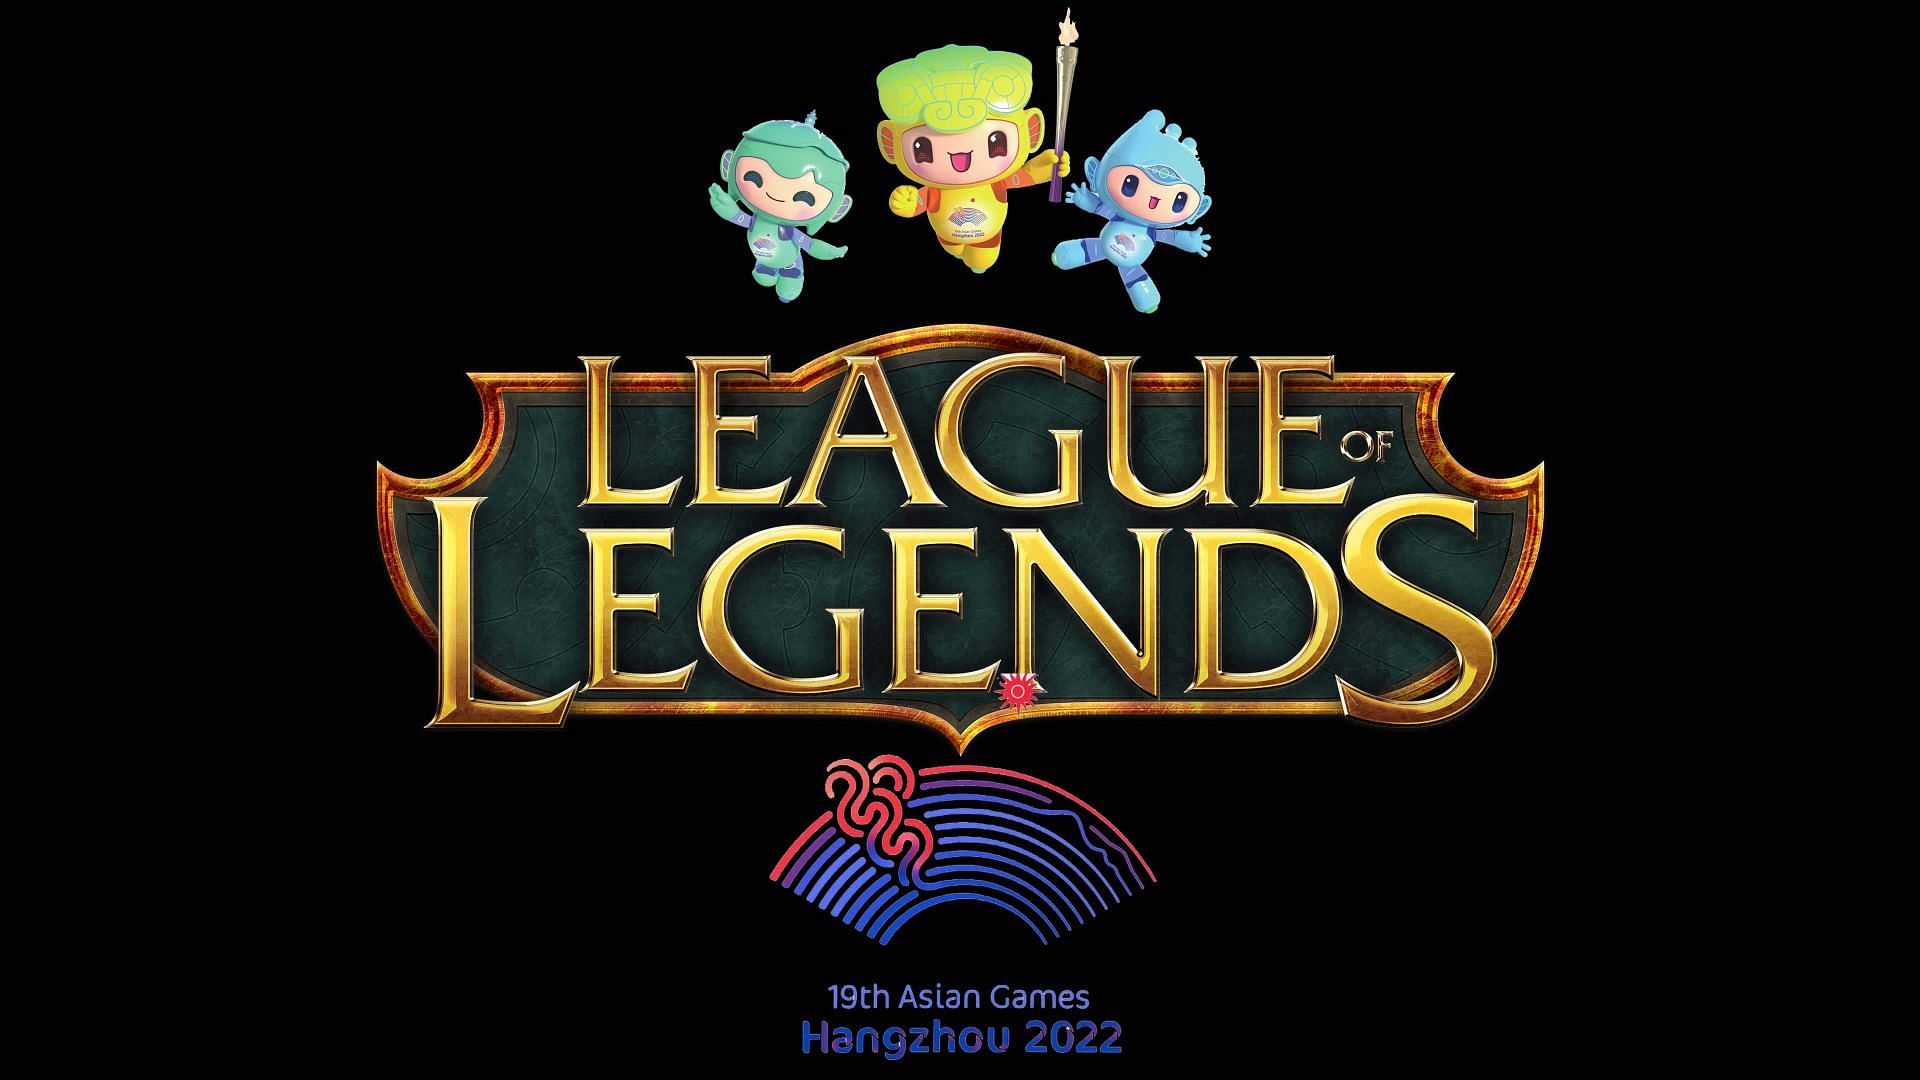 19th Asian Games League of Legends at 19th Asian Games Participating